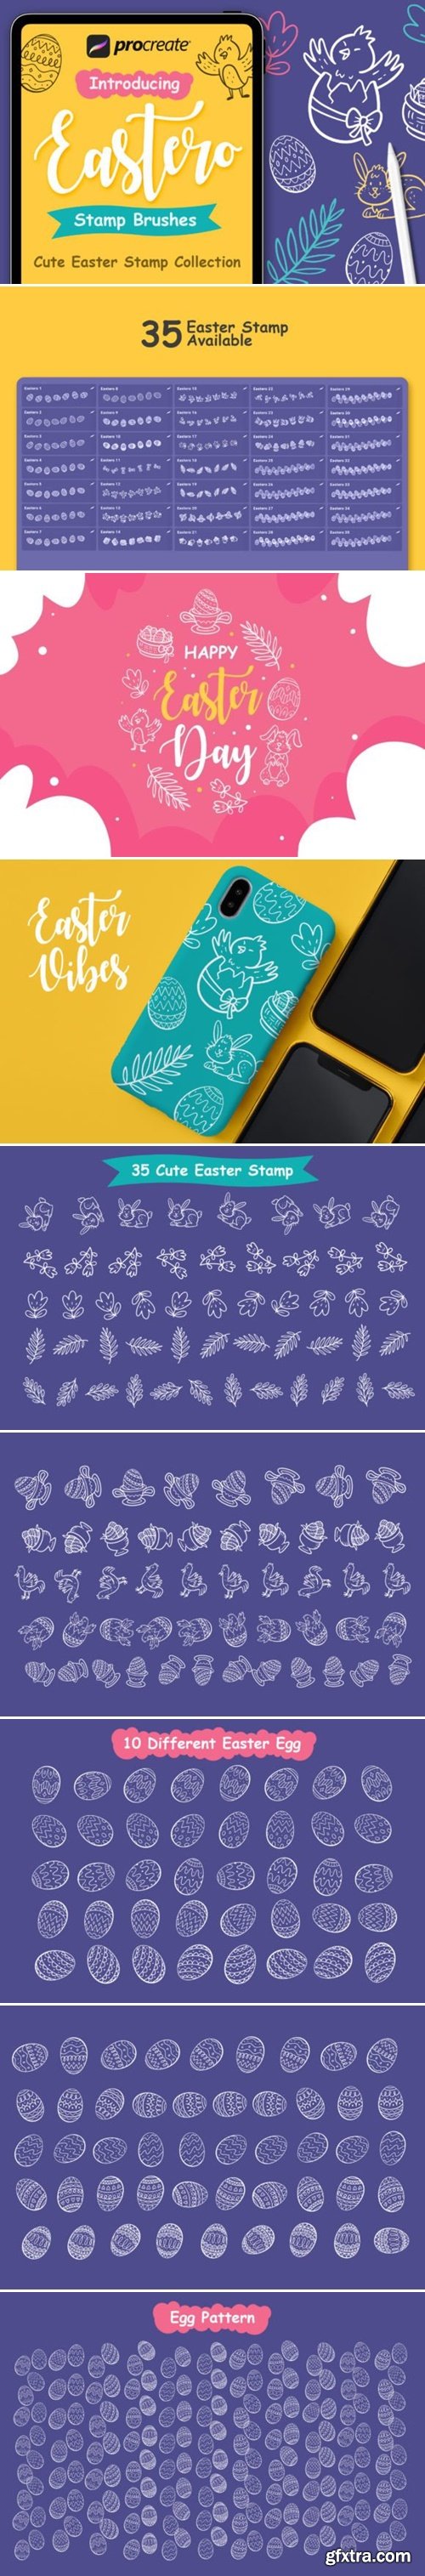 Easter Stamp Procreate Brushes 58313181